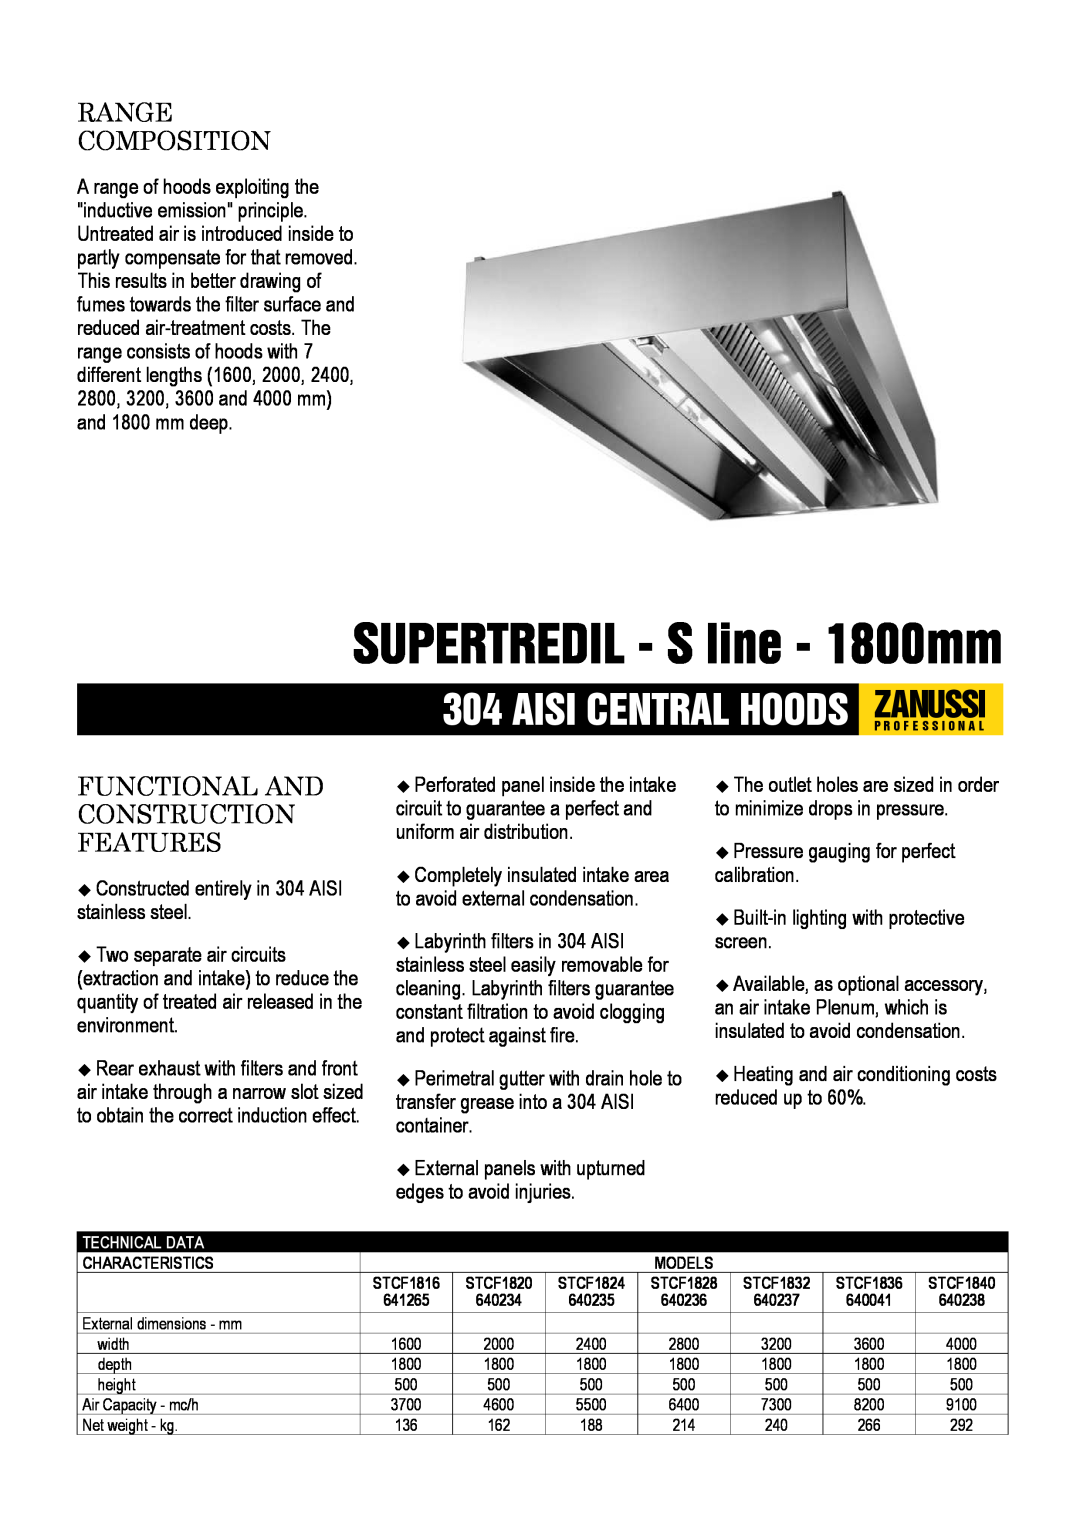 Zanussi STCF1820, 641265 dimensions SUPERTREDIL - S line - 1800mm, Range Composition, Functional And Construction Features 